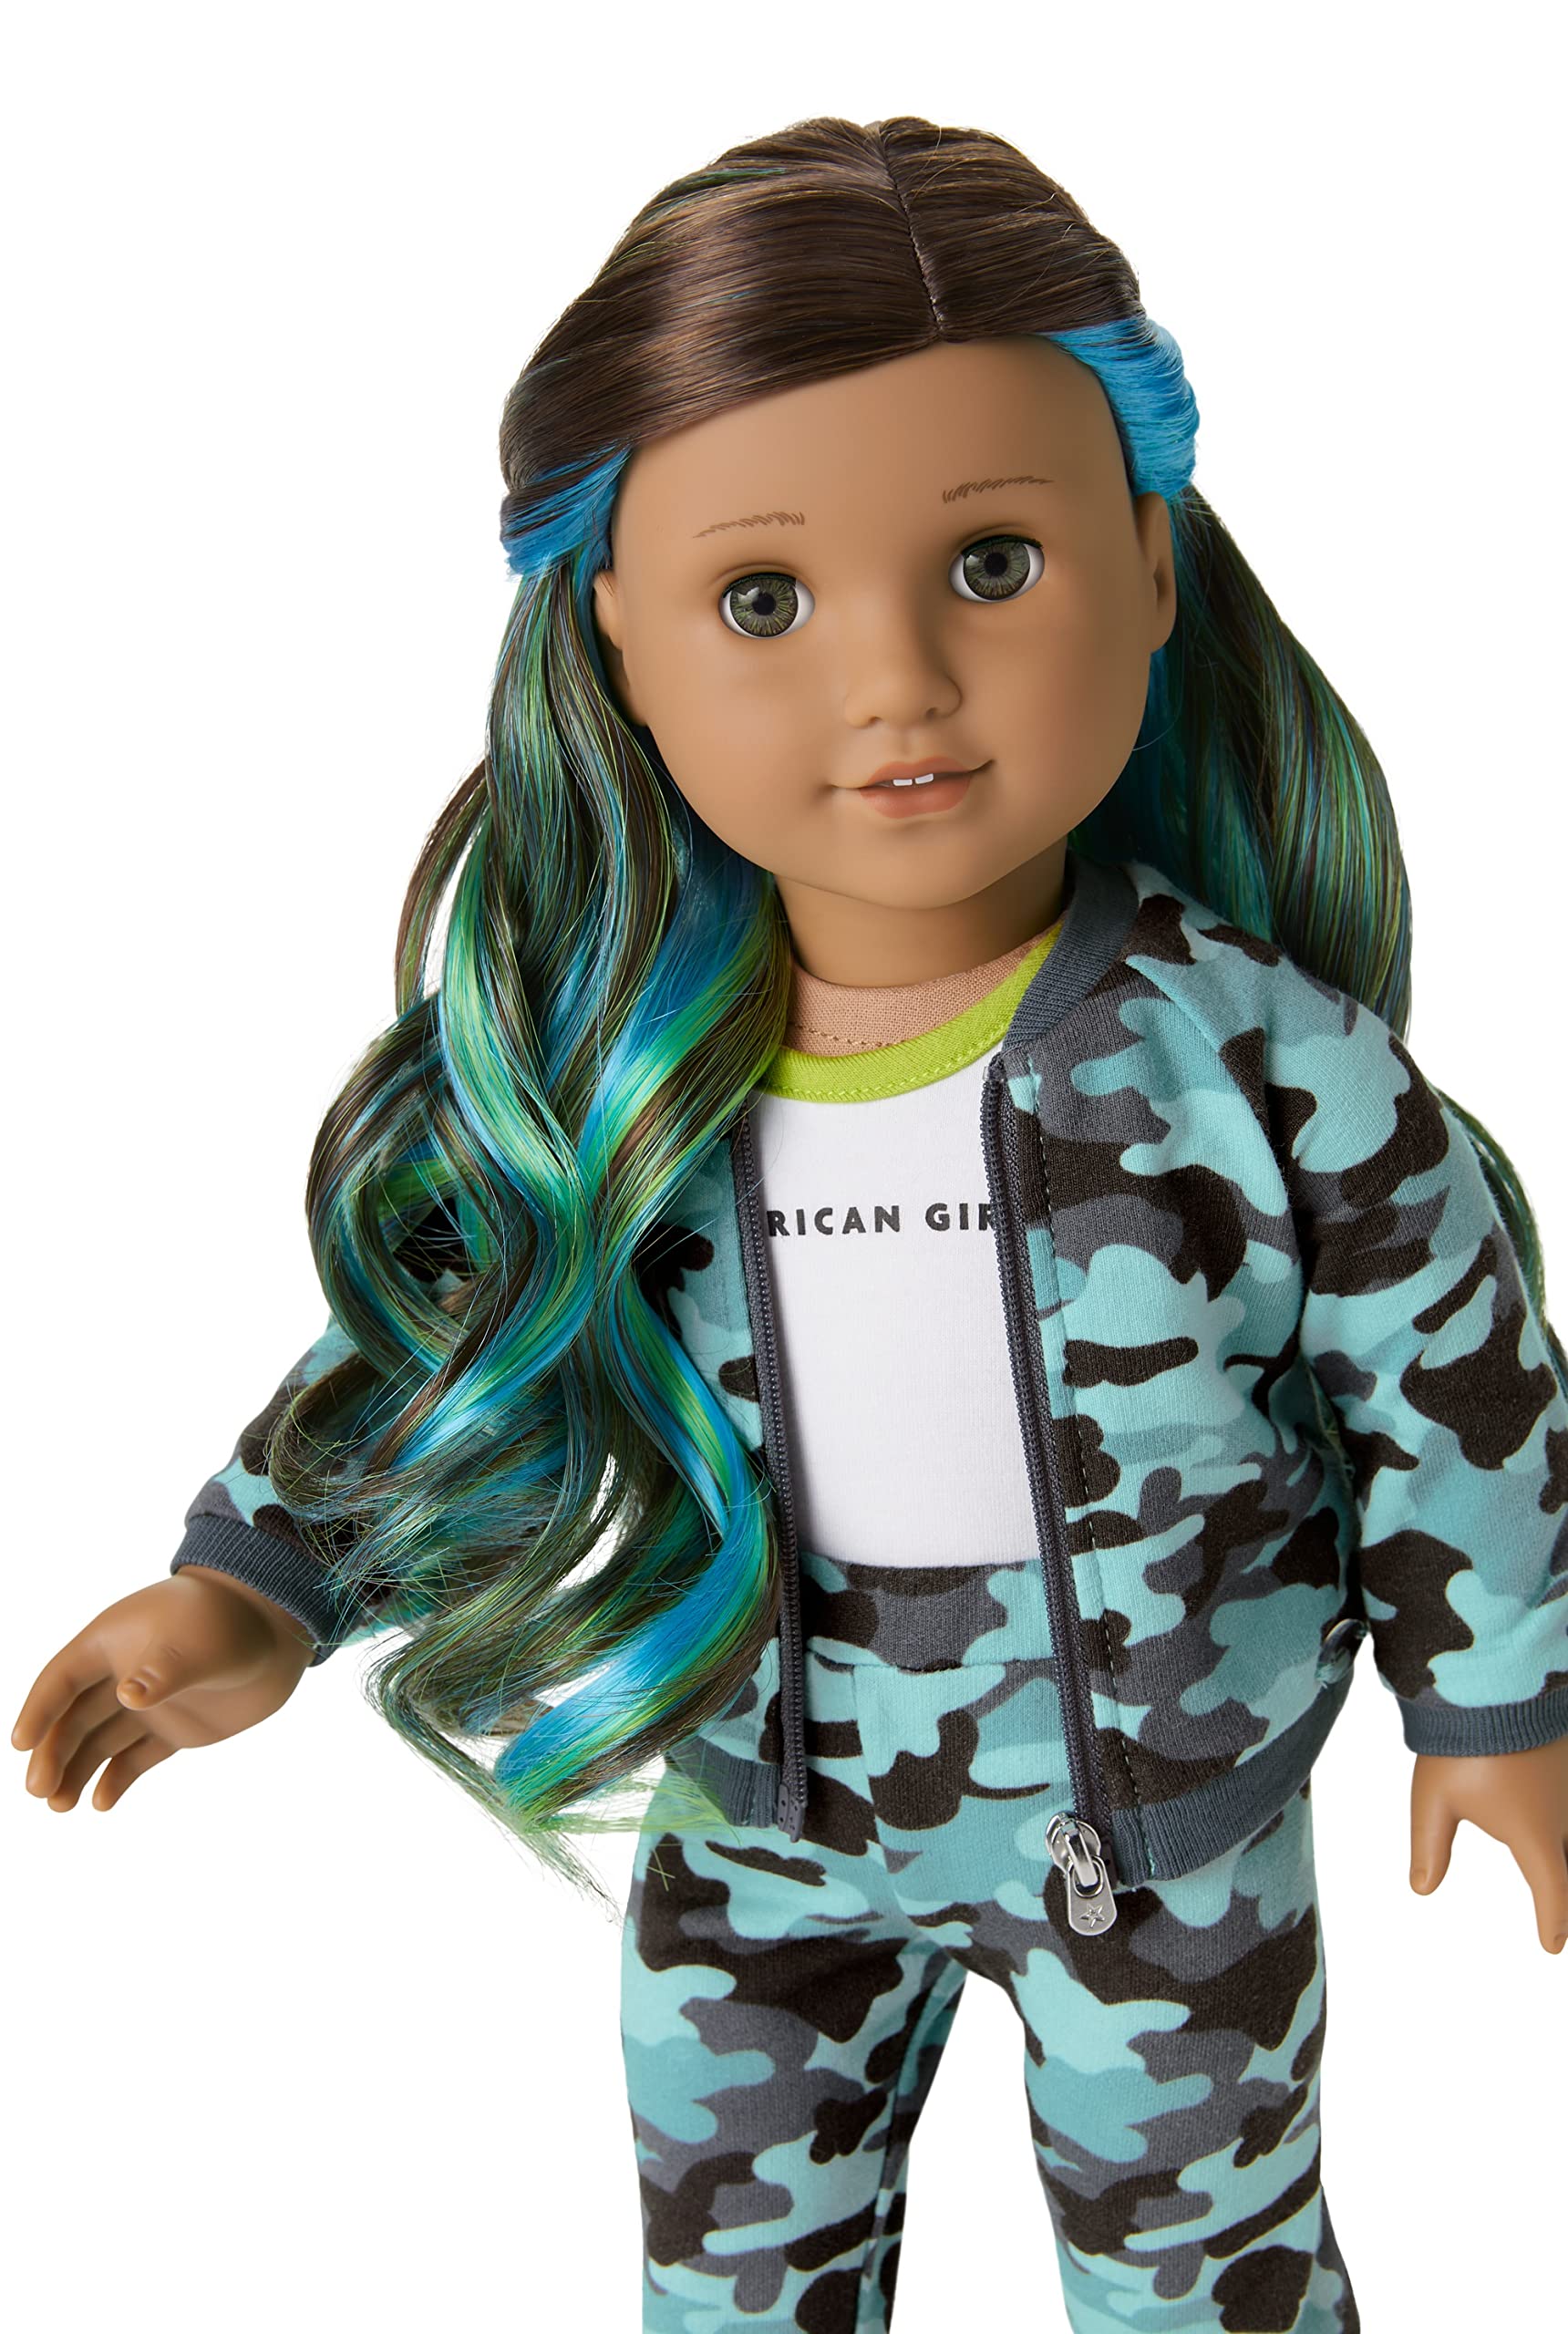 American Girl Truly Me 18-inch Doll #89 with Hazel Eyes, Brown Hair w/Highlights, and Tan Skin in Camo Outfit, For Ages 6+